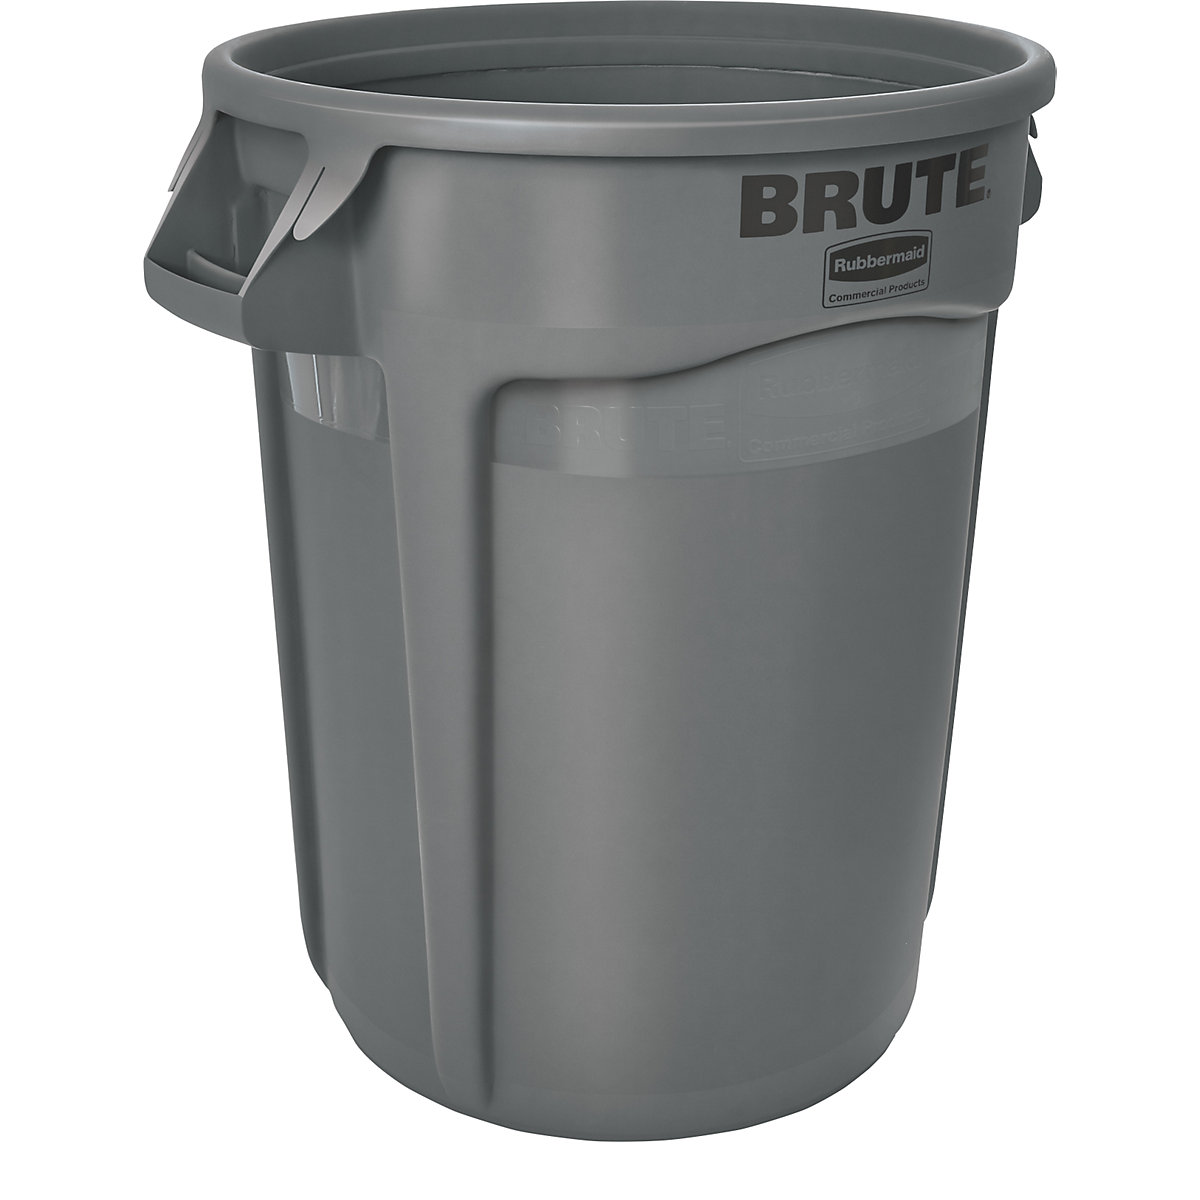 BRUTE® universal container, round – Rubbermaid, capacity 121 l, grey-11